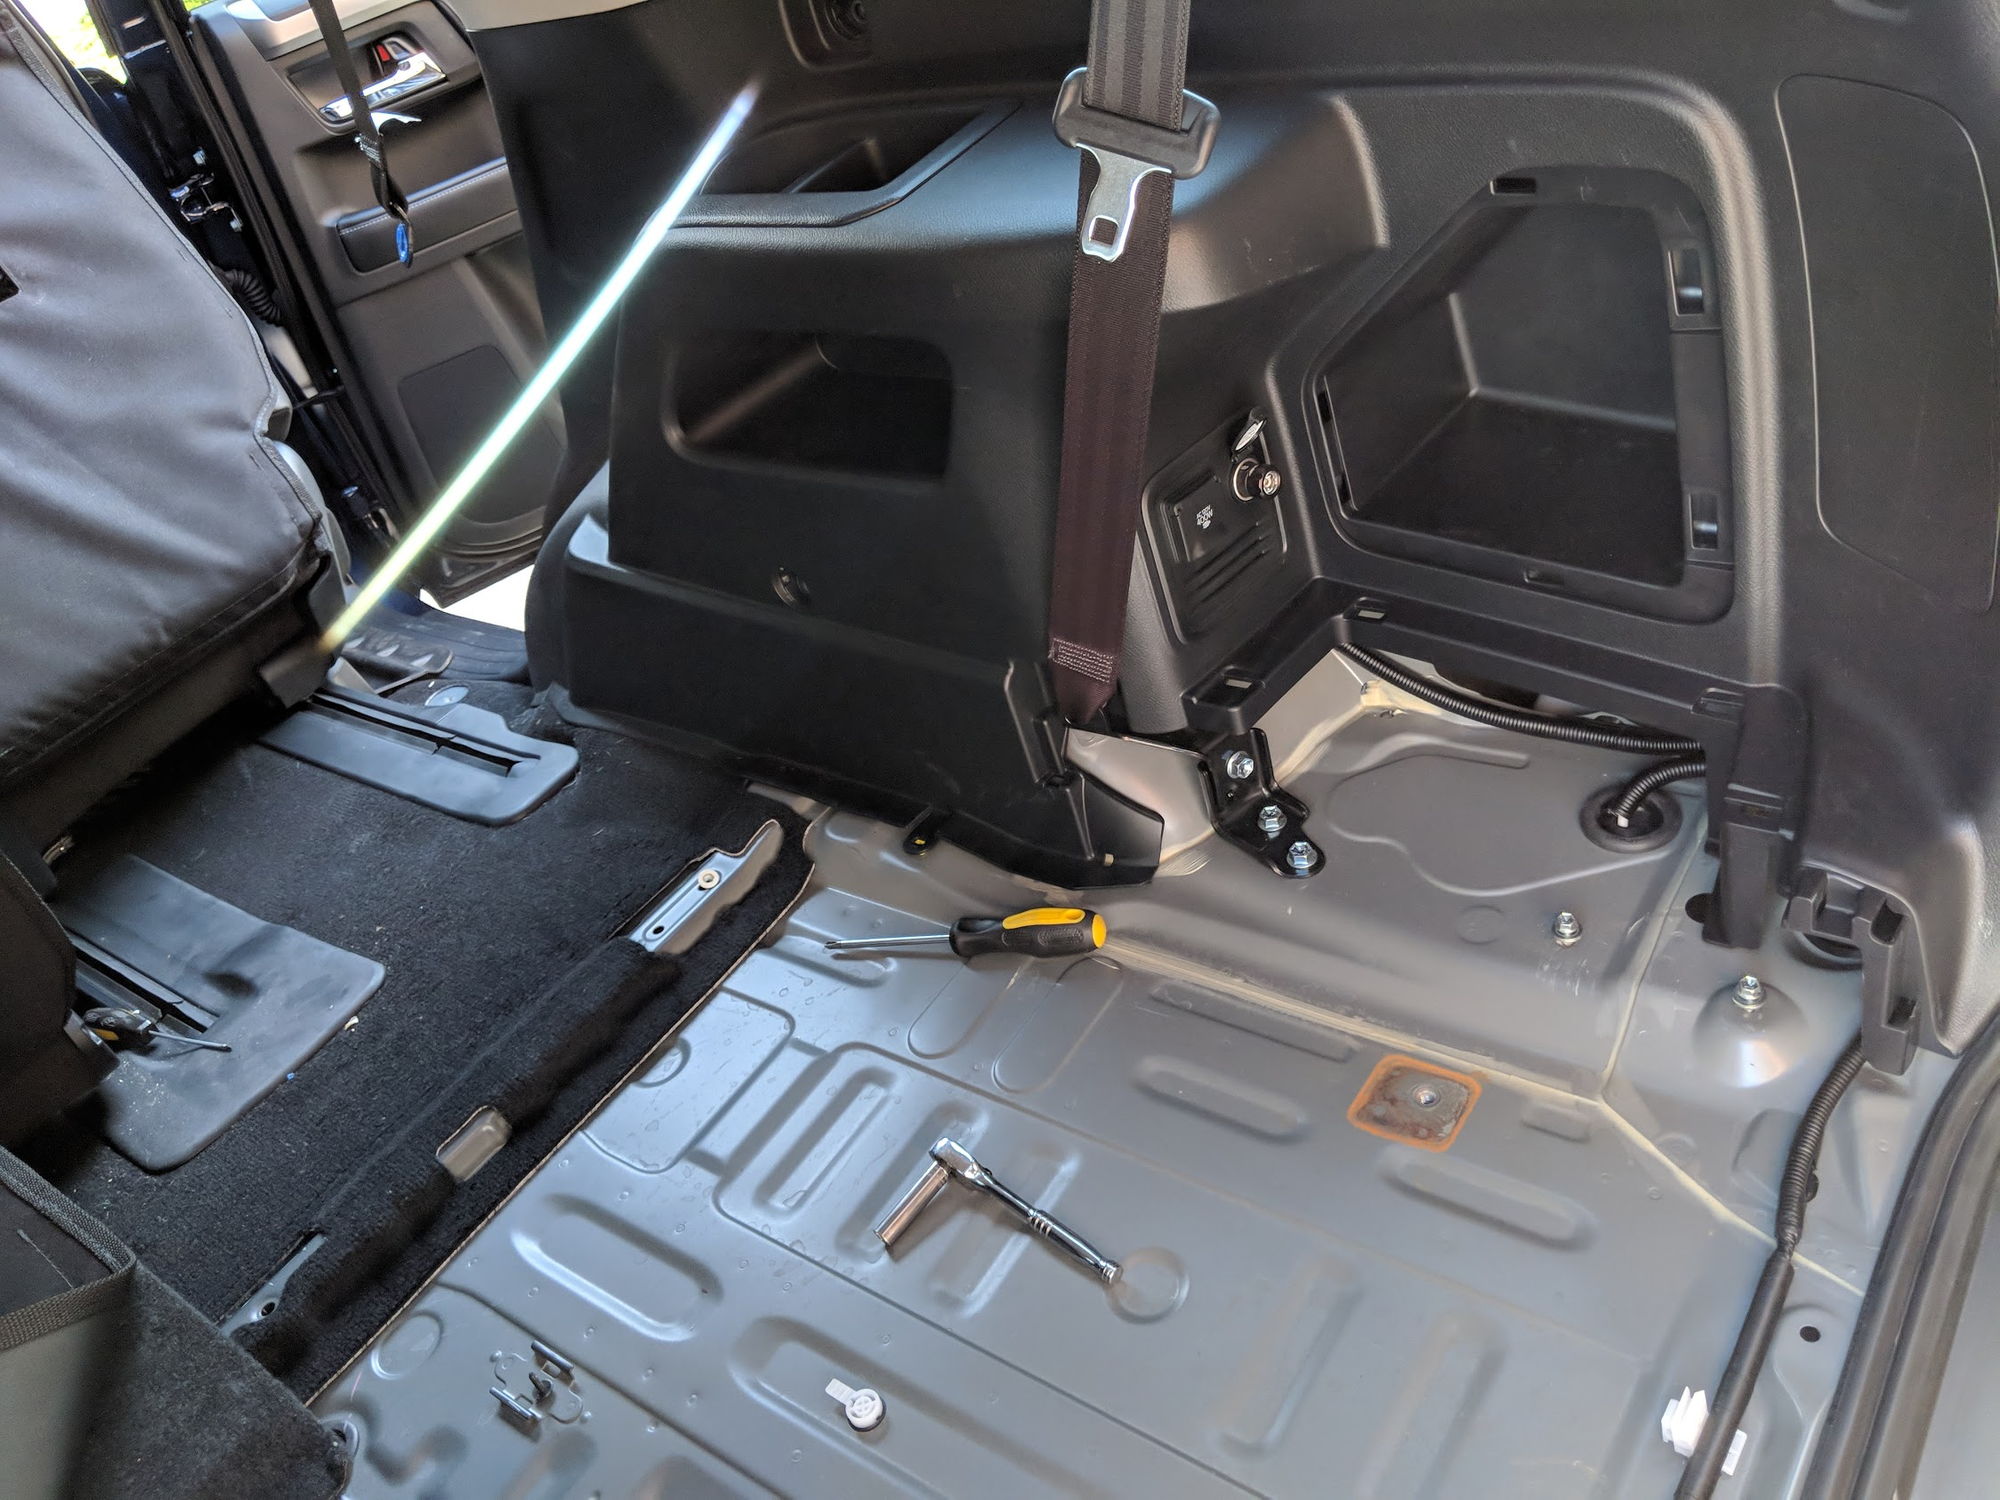 Third Row Seat Removal To Access Rear Panel Pocket Subwoofer Install